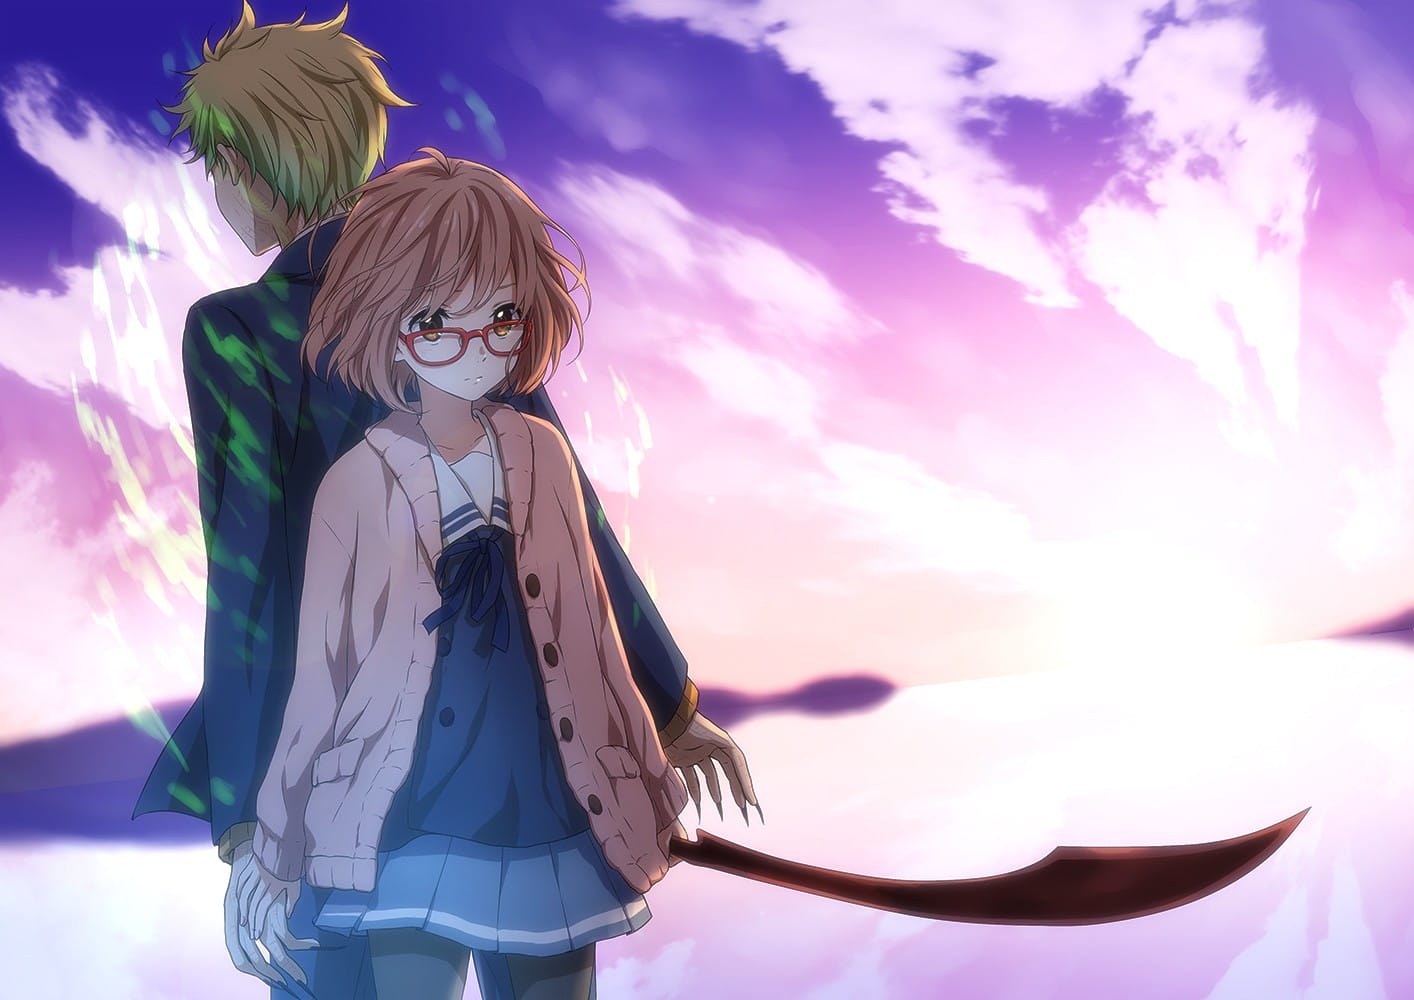 ANIME TUESDAY: Beyond the Boundary - Shocking Pink Review